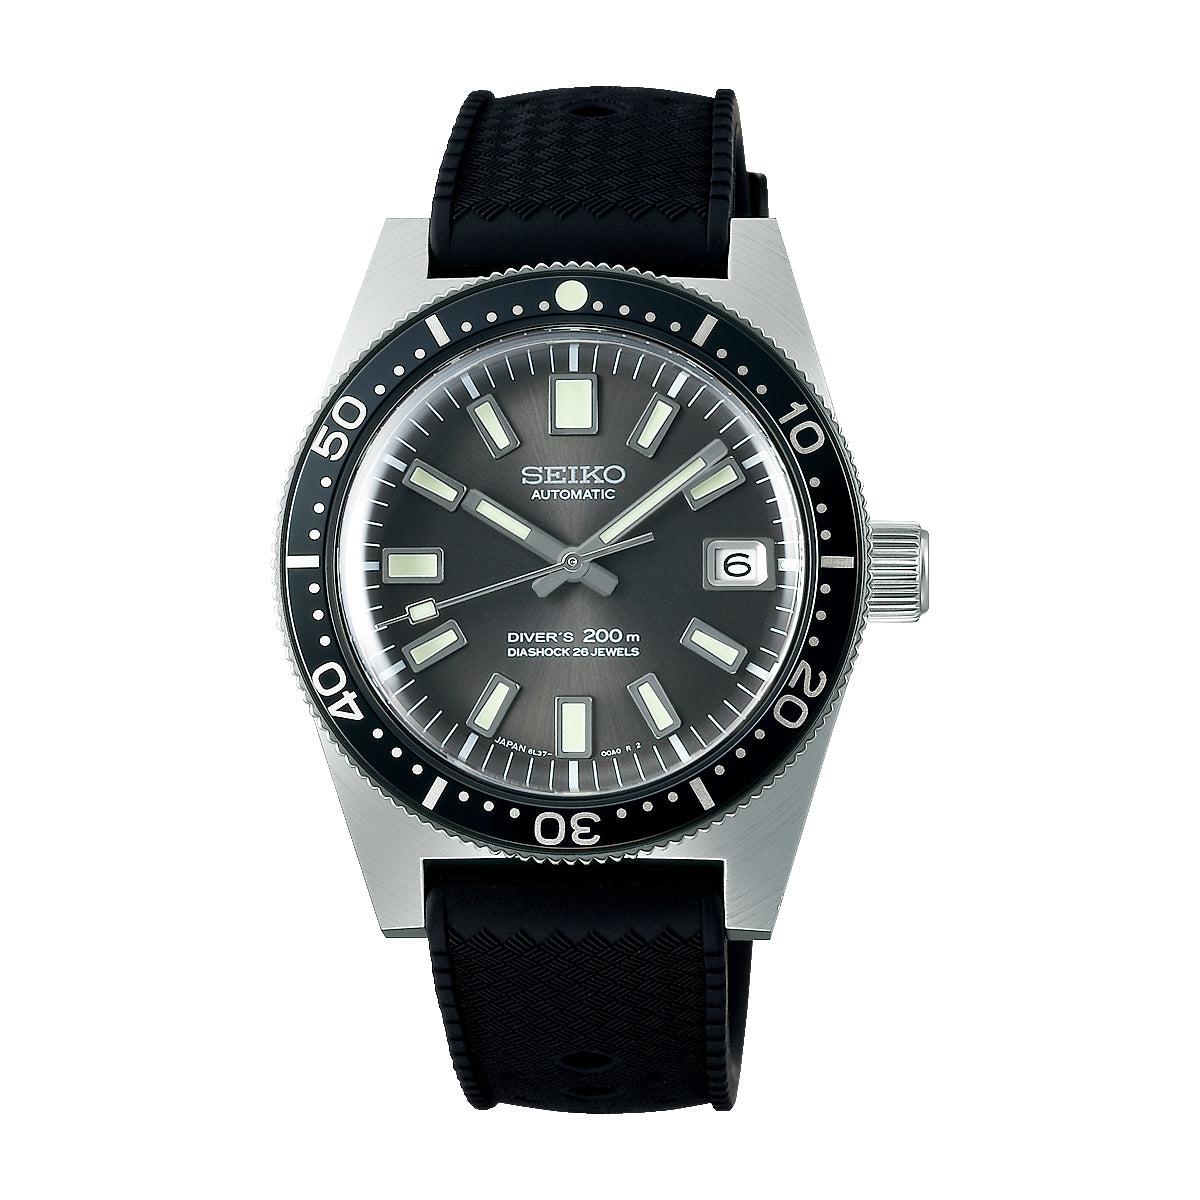 Prospex 1965 Diver’s Re-creation Limited Edition